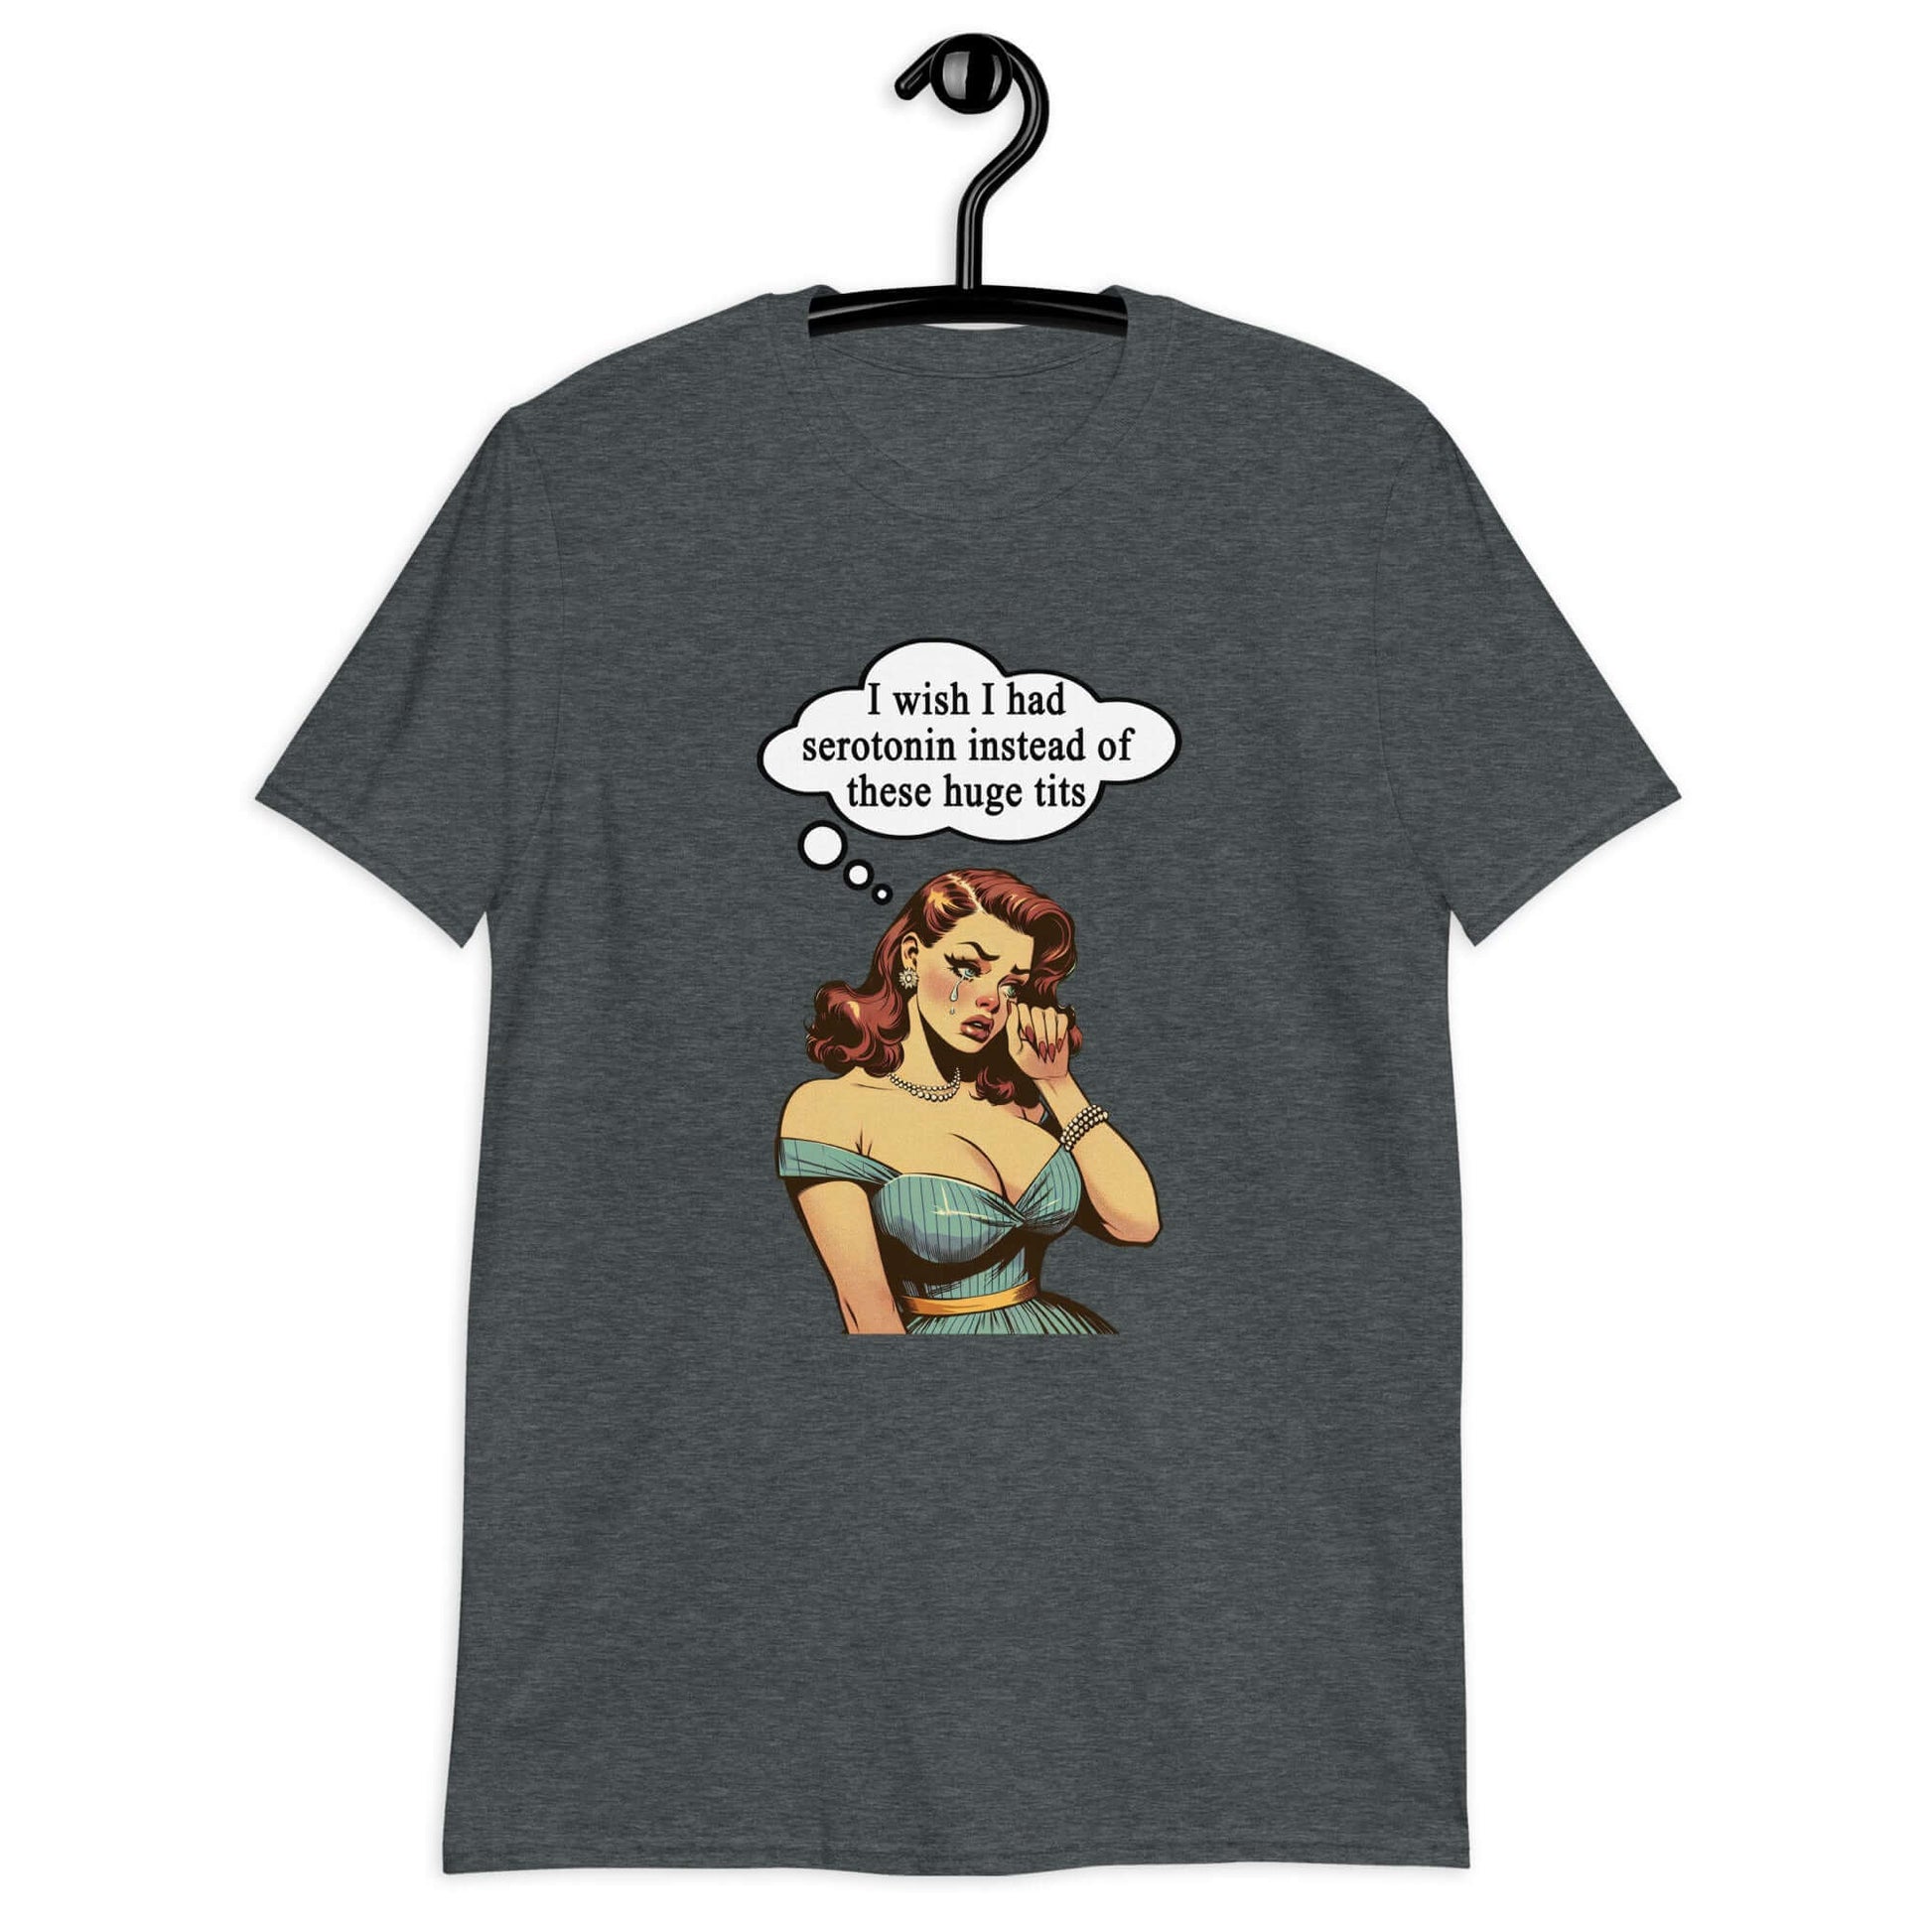 Dark heather grey t-shirt with an image of a busty pin-up lady with thought bubble that says I wish I had serotonin instead of these huge tits printed on the front.